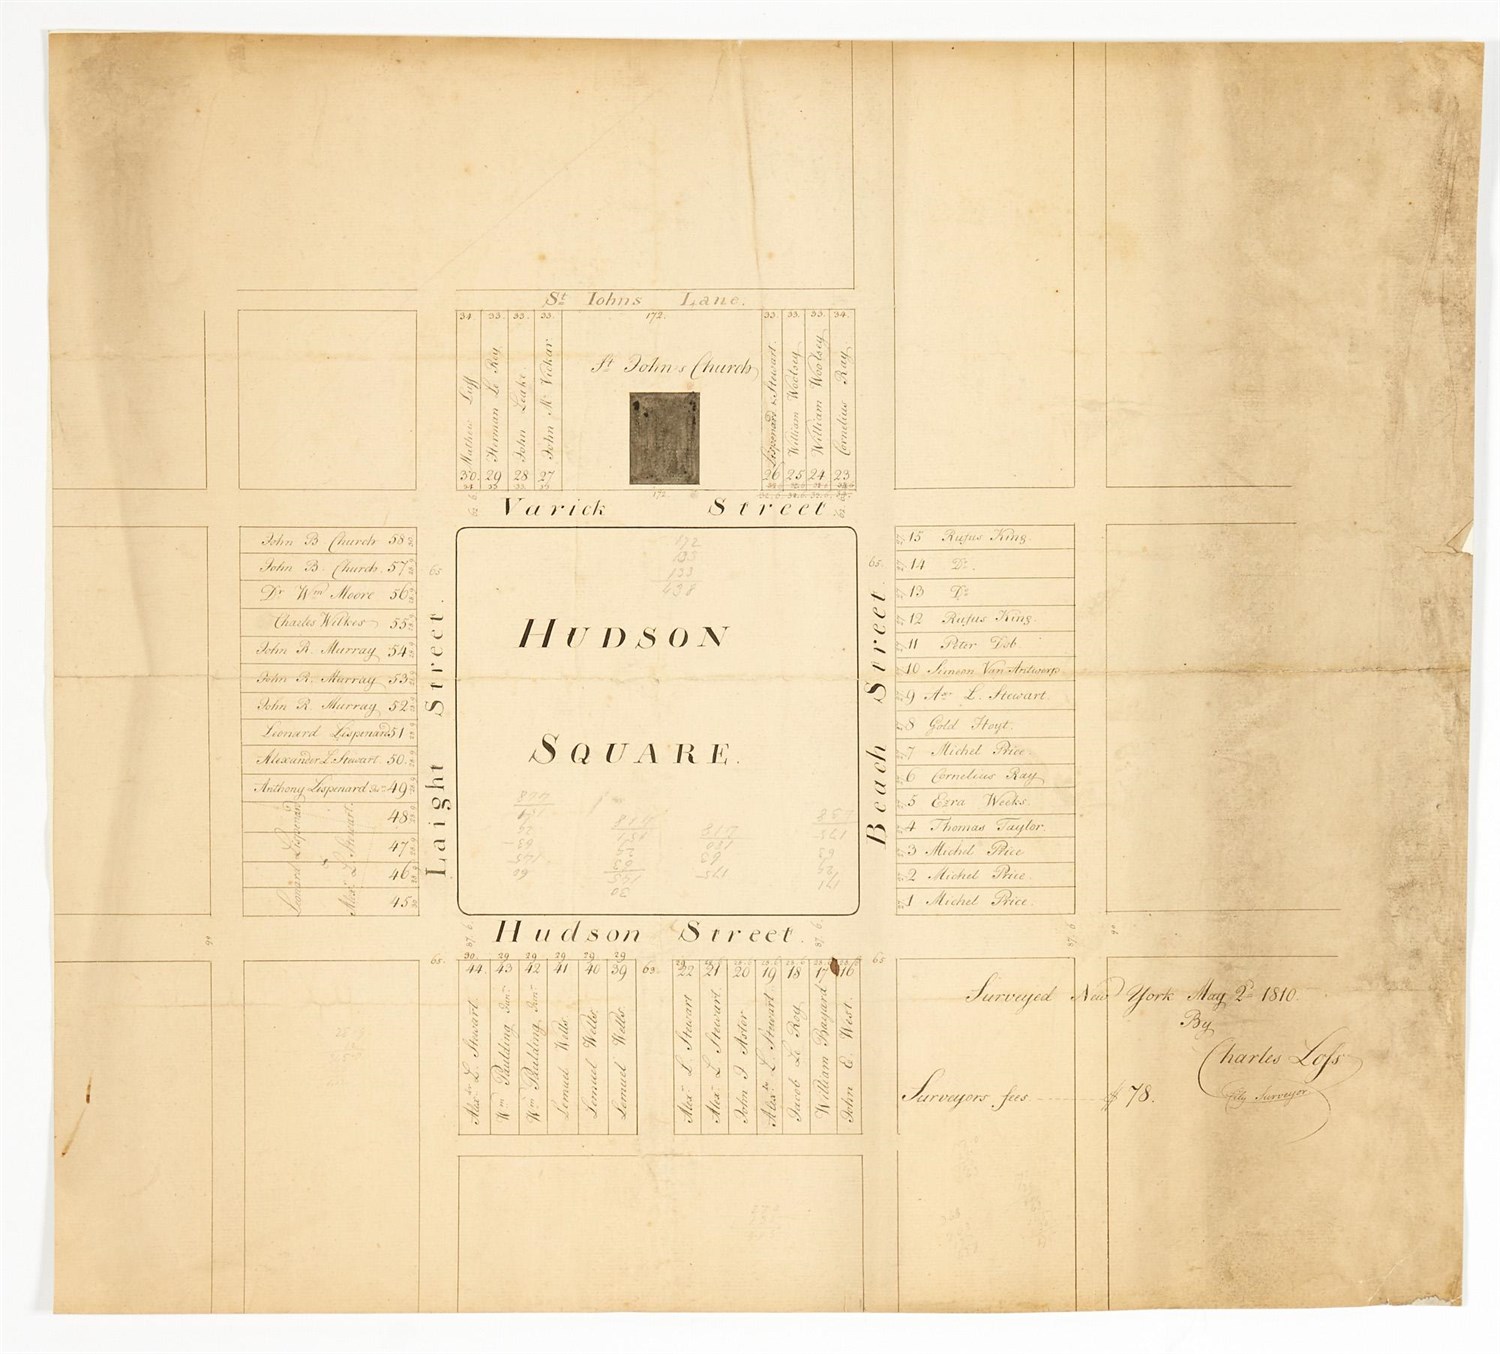 Lot 95 - Hudson's Square, now considered the northern part of Tribeca